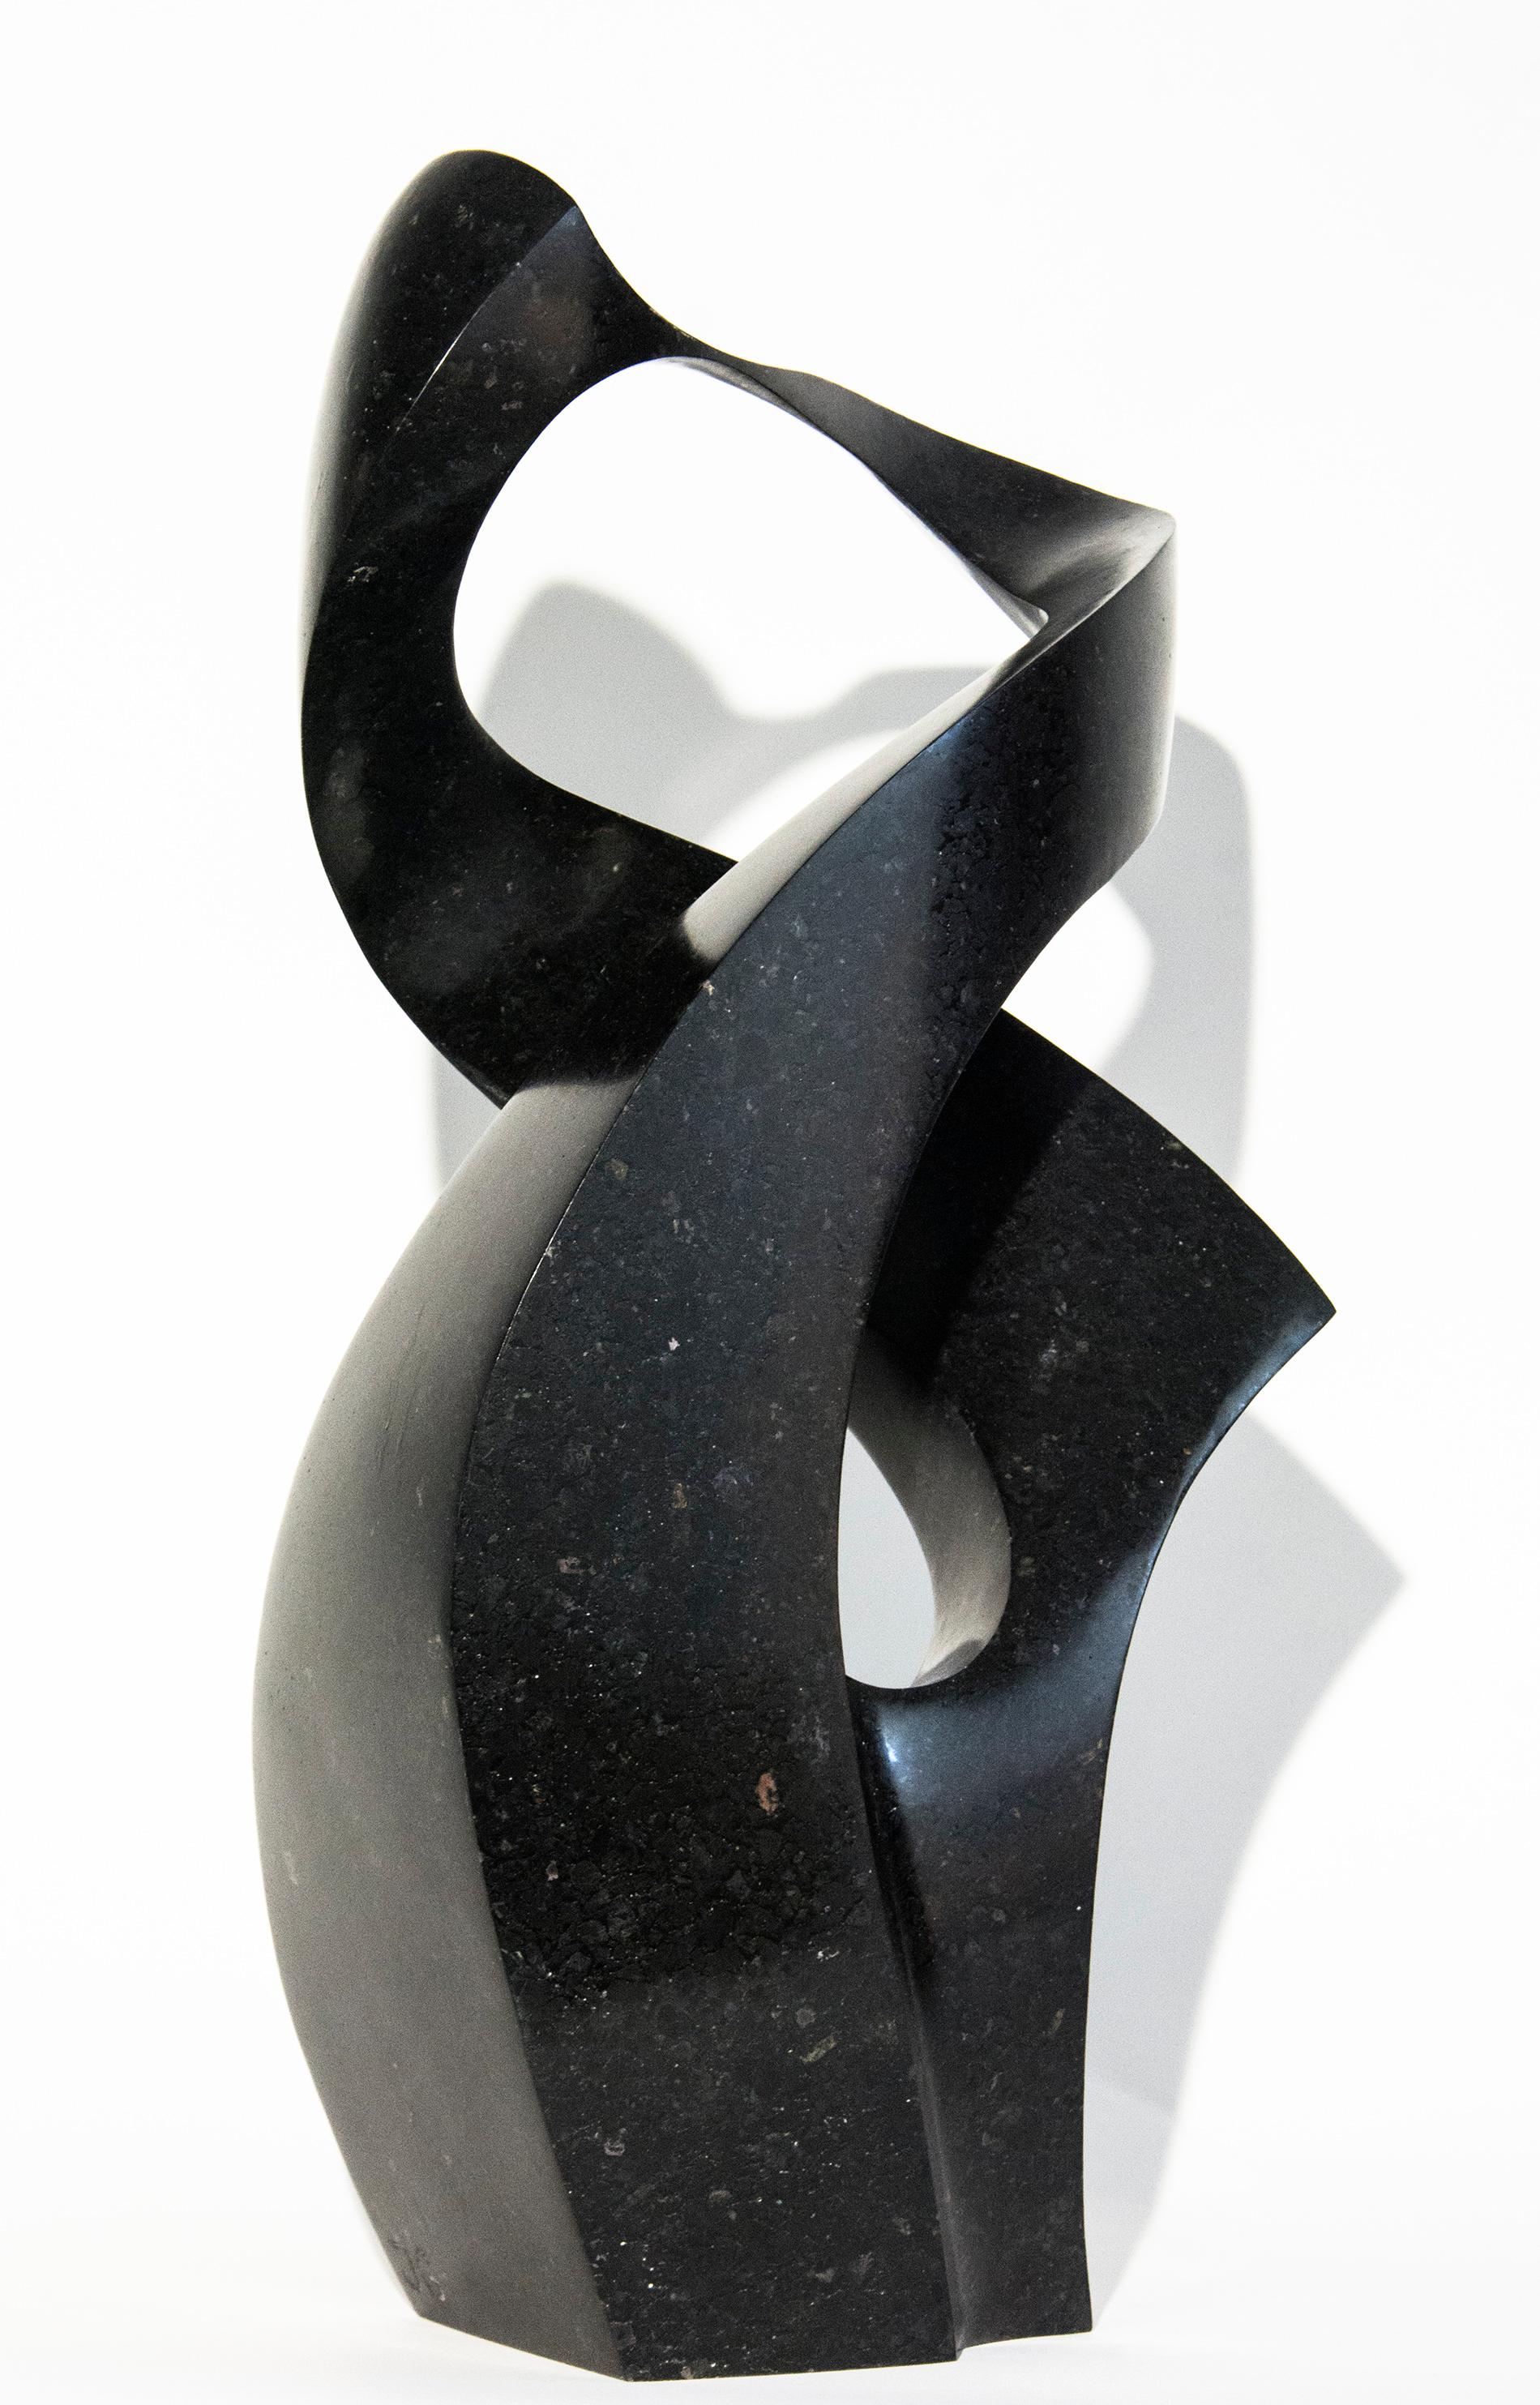 Sculptor Jeremy Guy’s lyrical and moving abstract representation of a human embrace is created from engineered black granite. Two gently curved forms are intertwined in this contemporary tabletop sculpture that is limited to an edition of 50. The